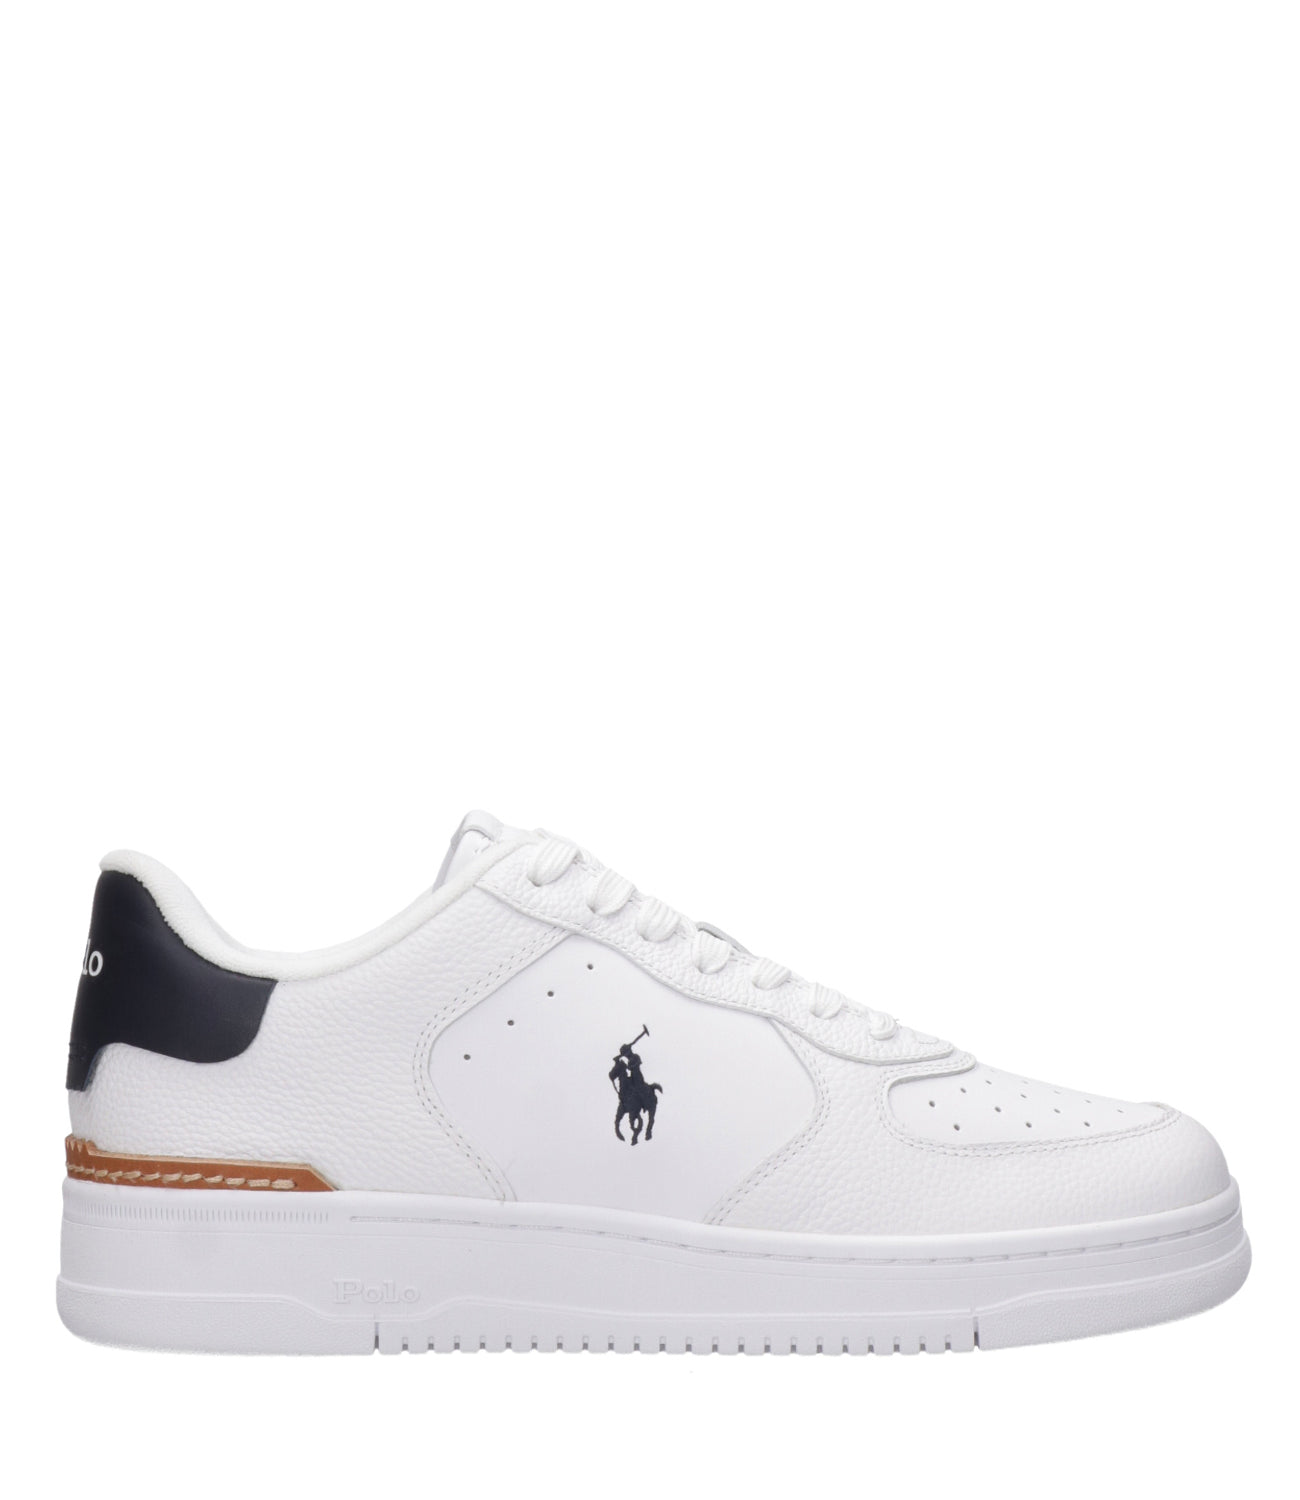 Polo Ralph Lauren | Sneakers Masters White and Blue